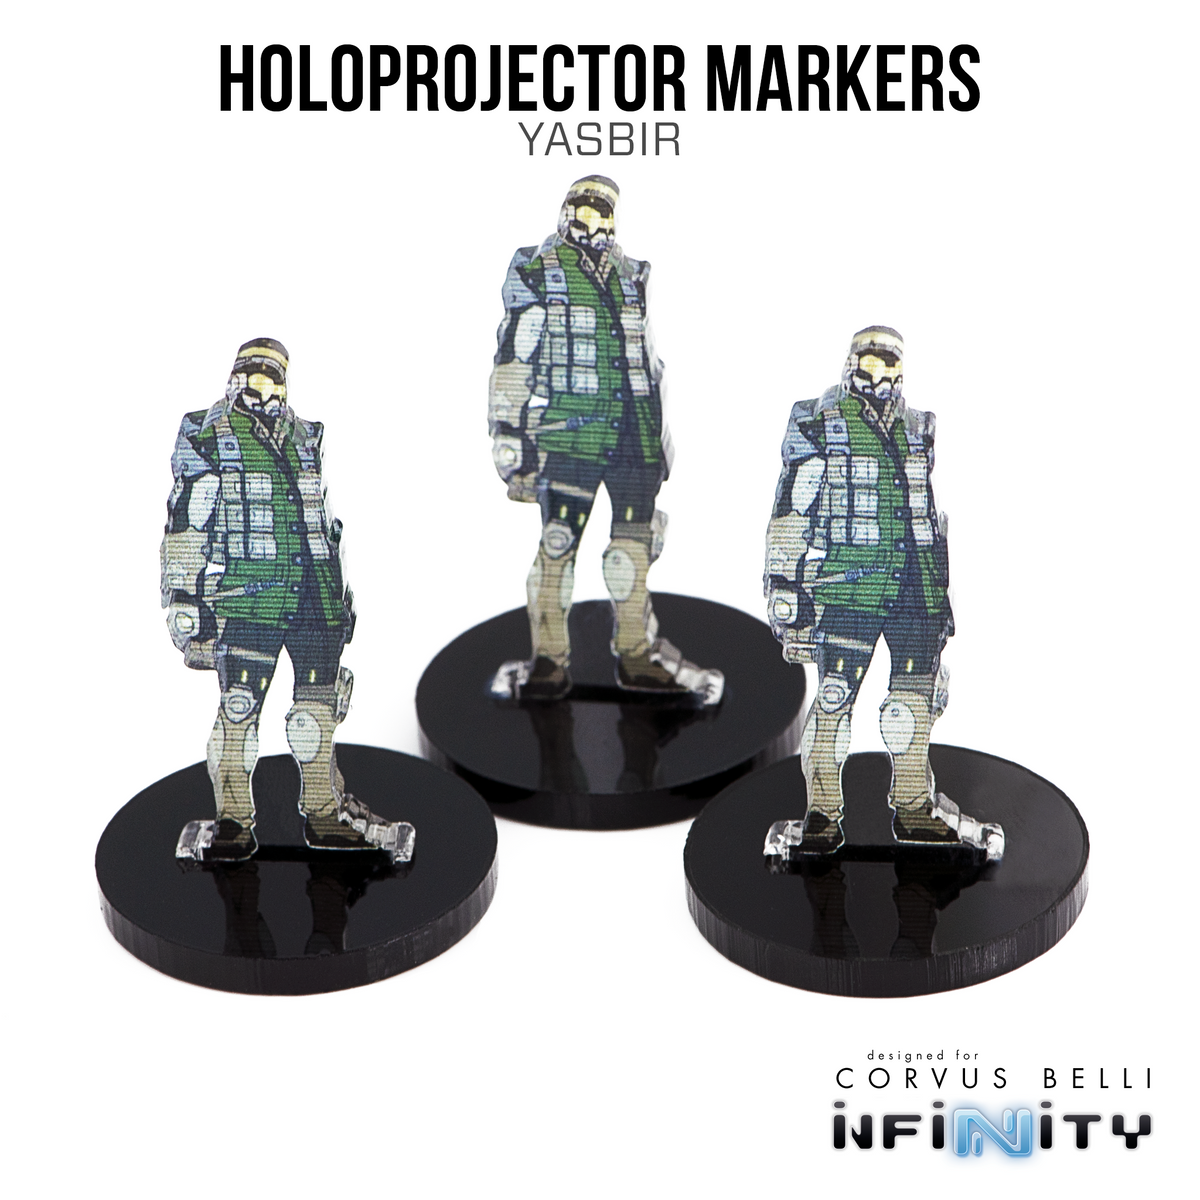 3D Holoprojector / Decoy Markers